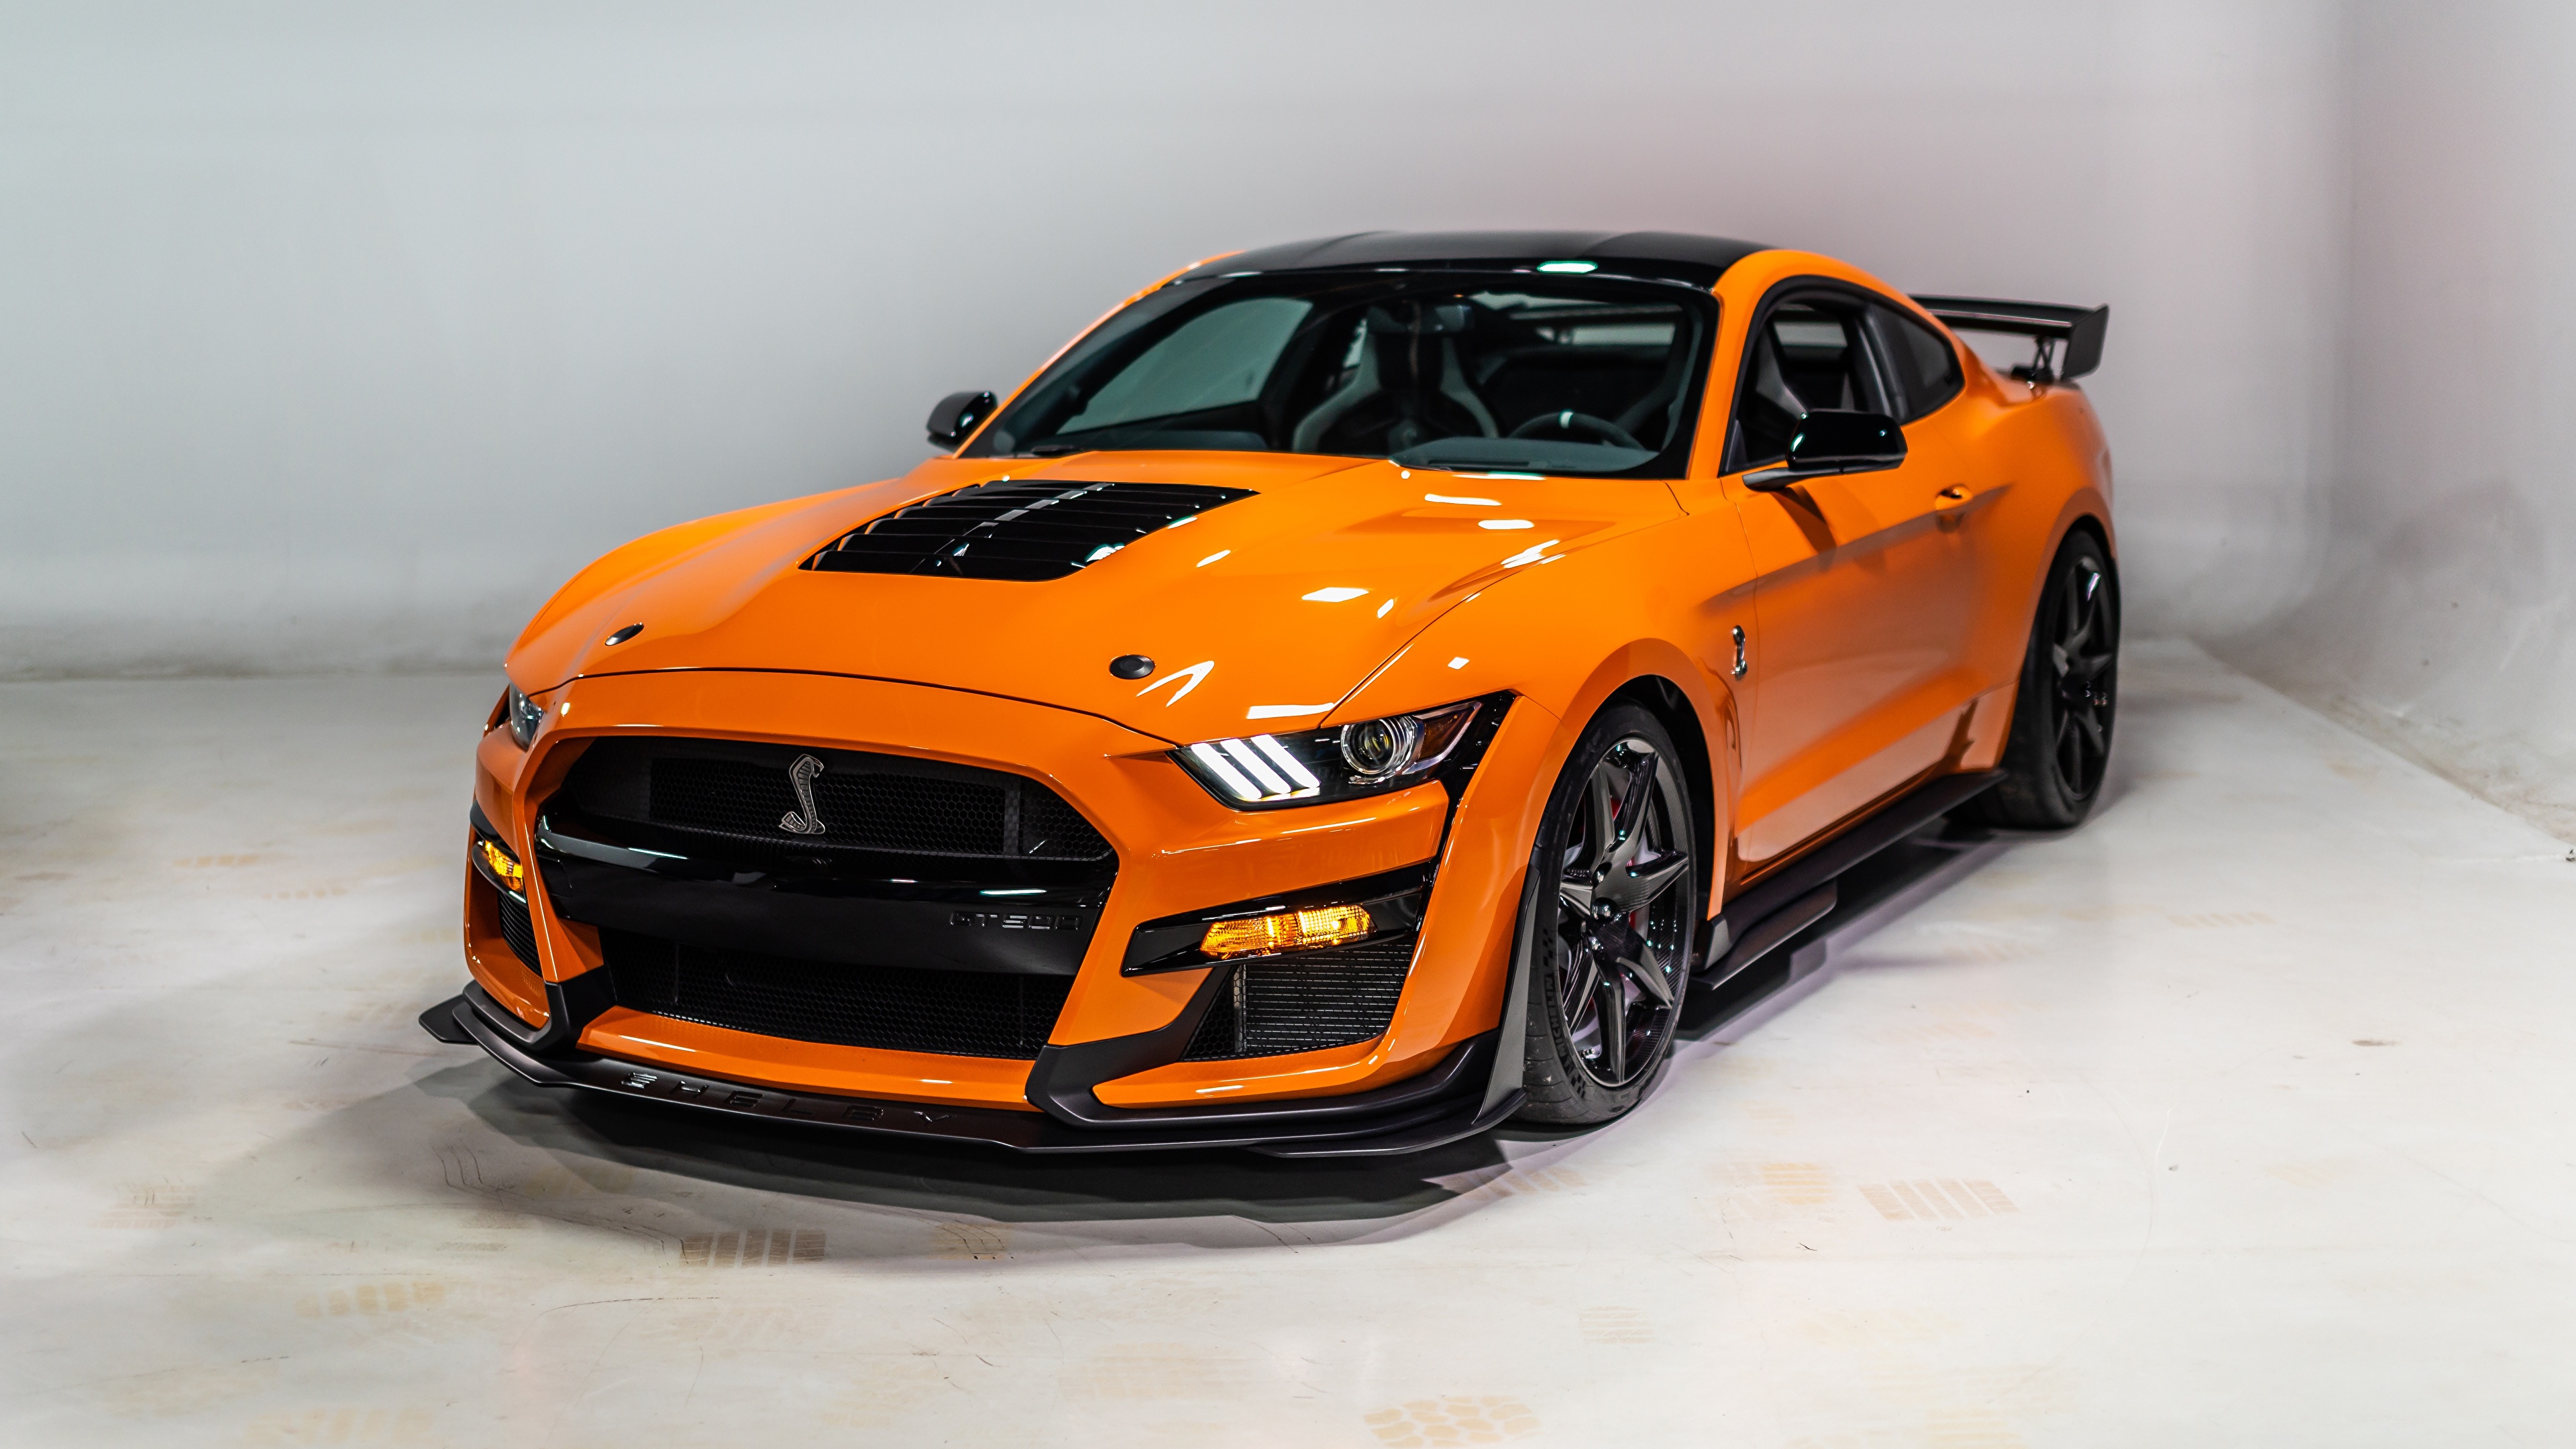 Image Ford Mustang Shelby GT500 2020 Orange Cars Metallic